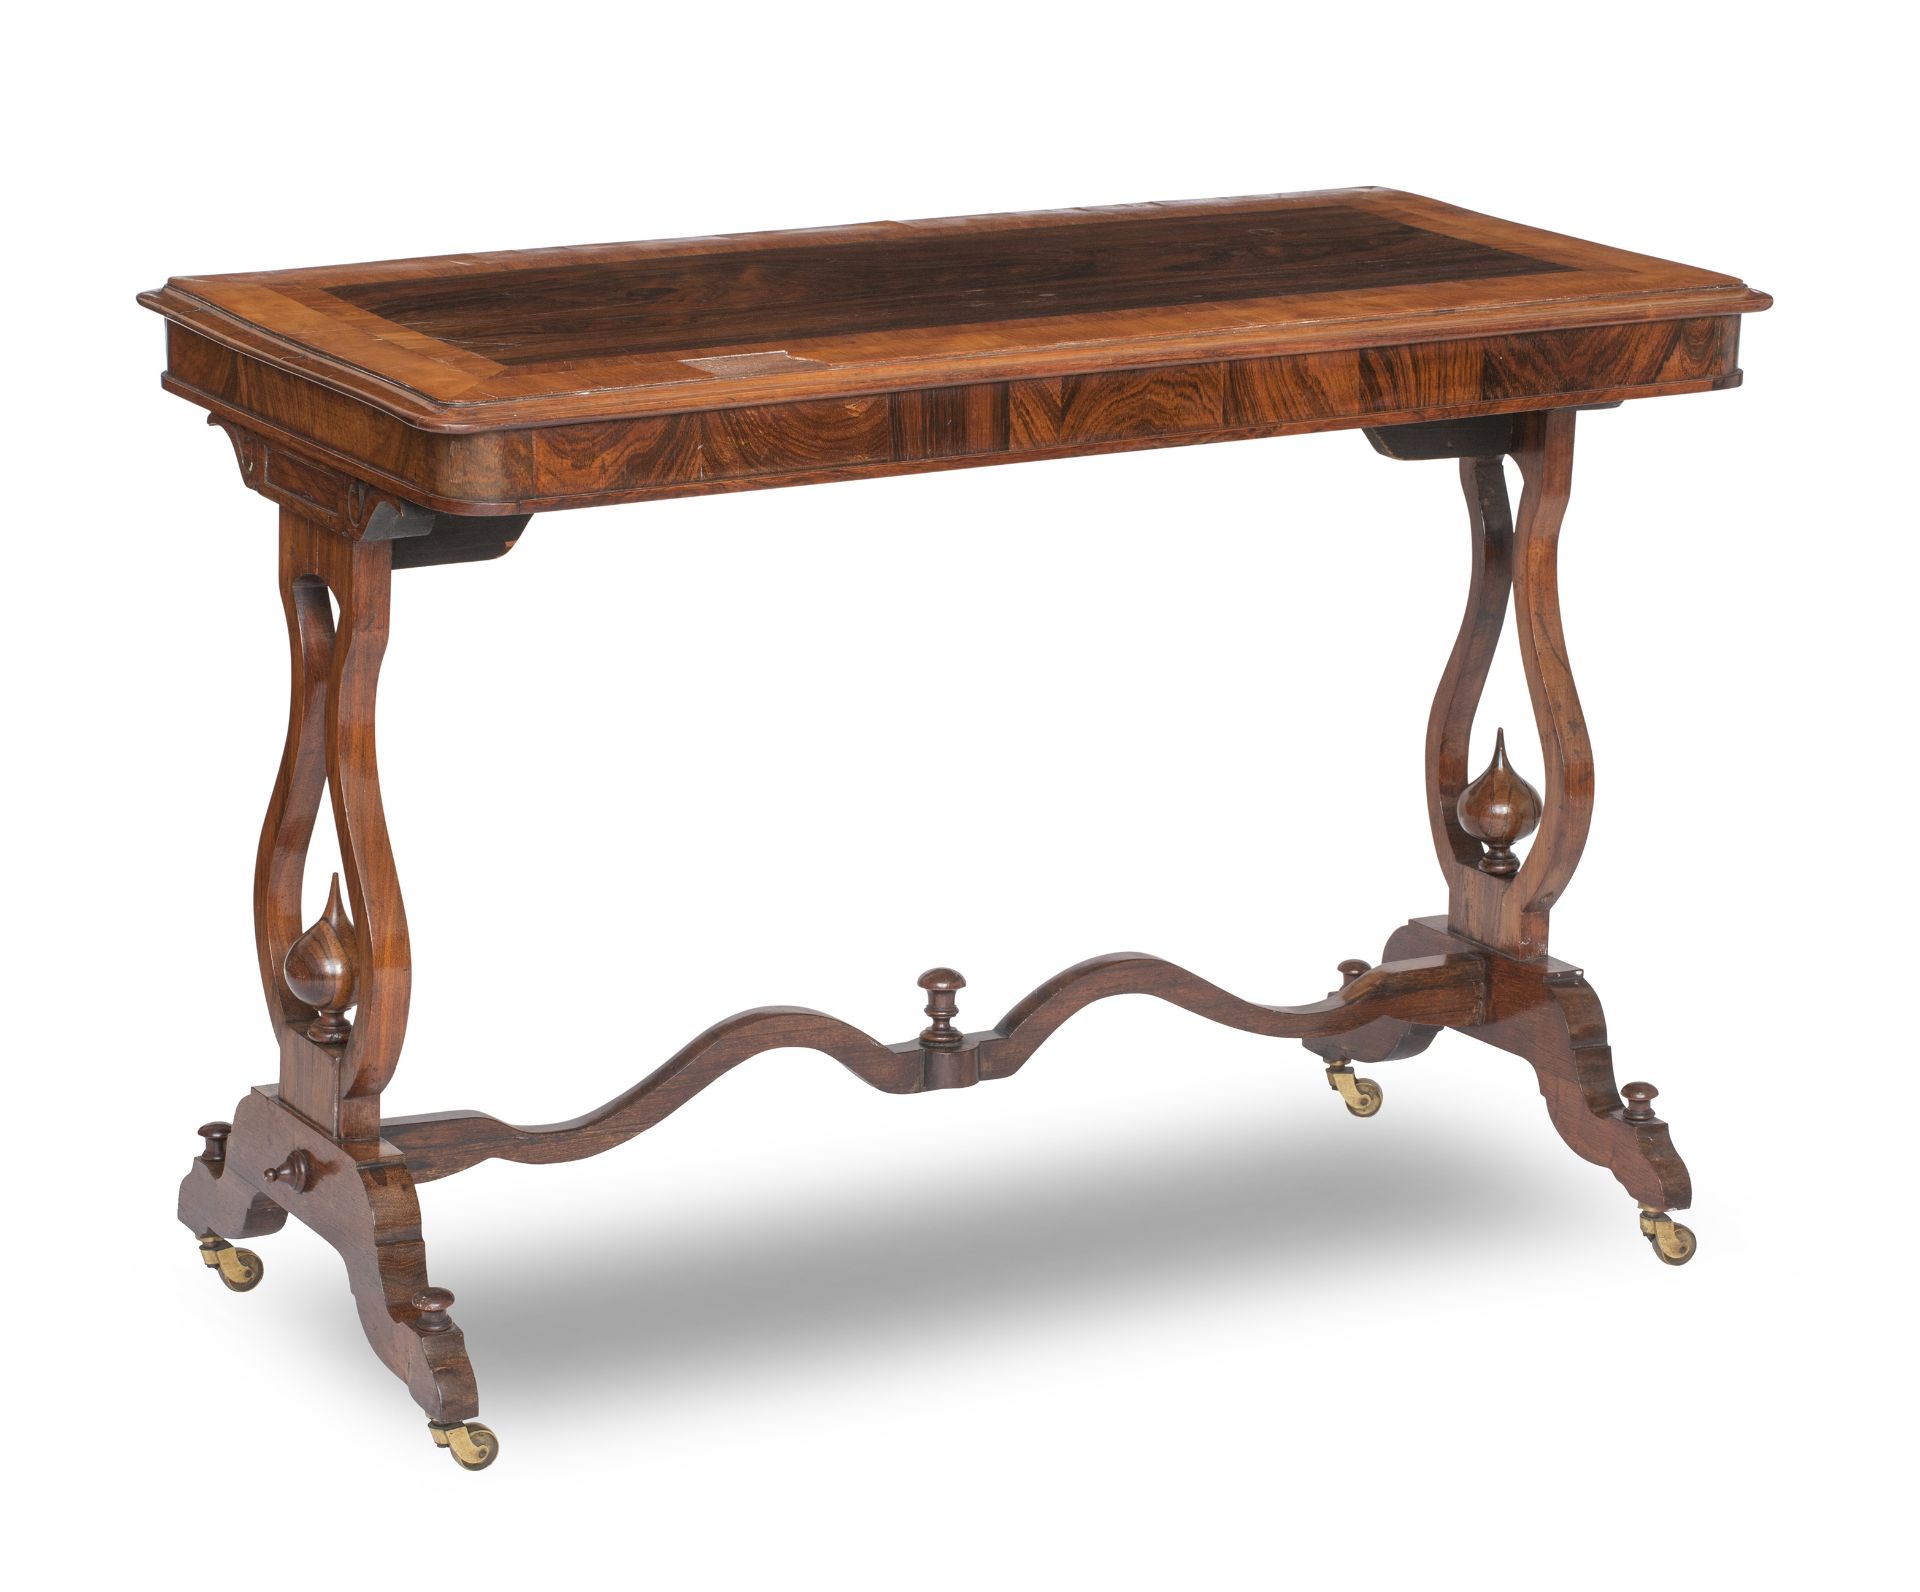 A late Regency satinwood and rosewood library table